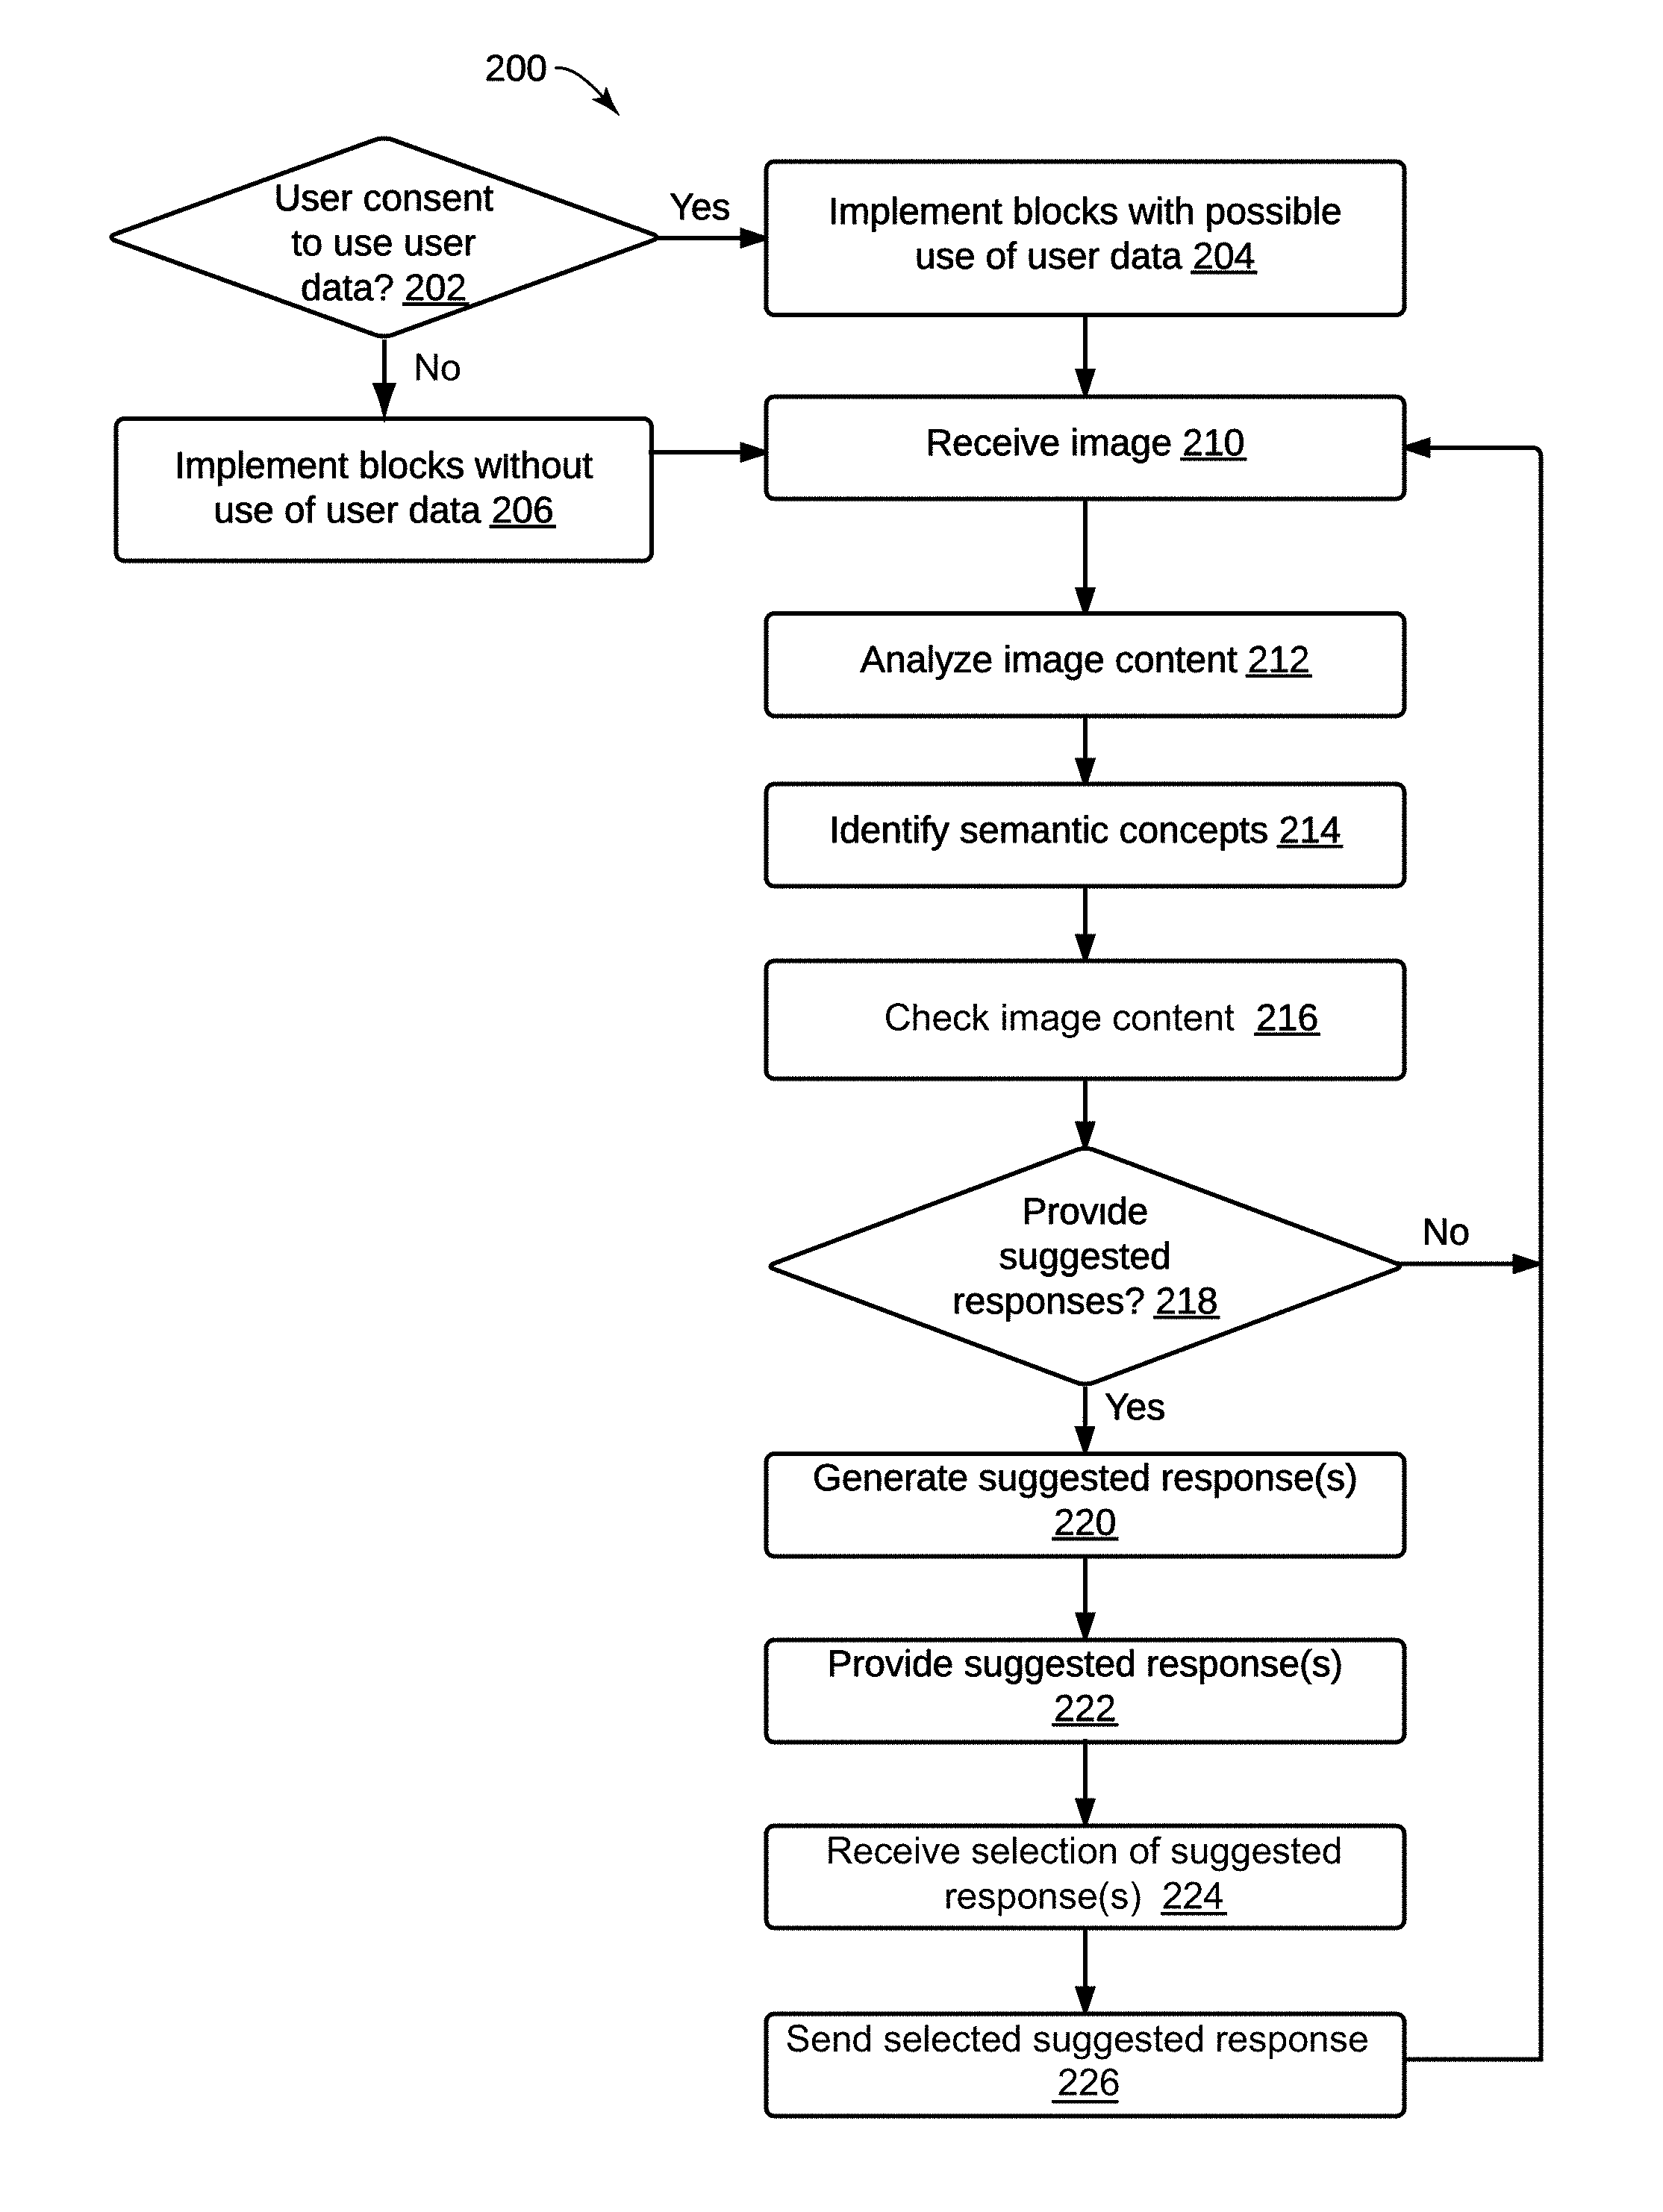 Automatic response suggestions based on images received in messaging applications  - US-10015124-B2